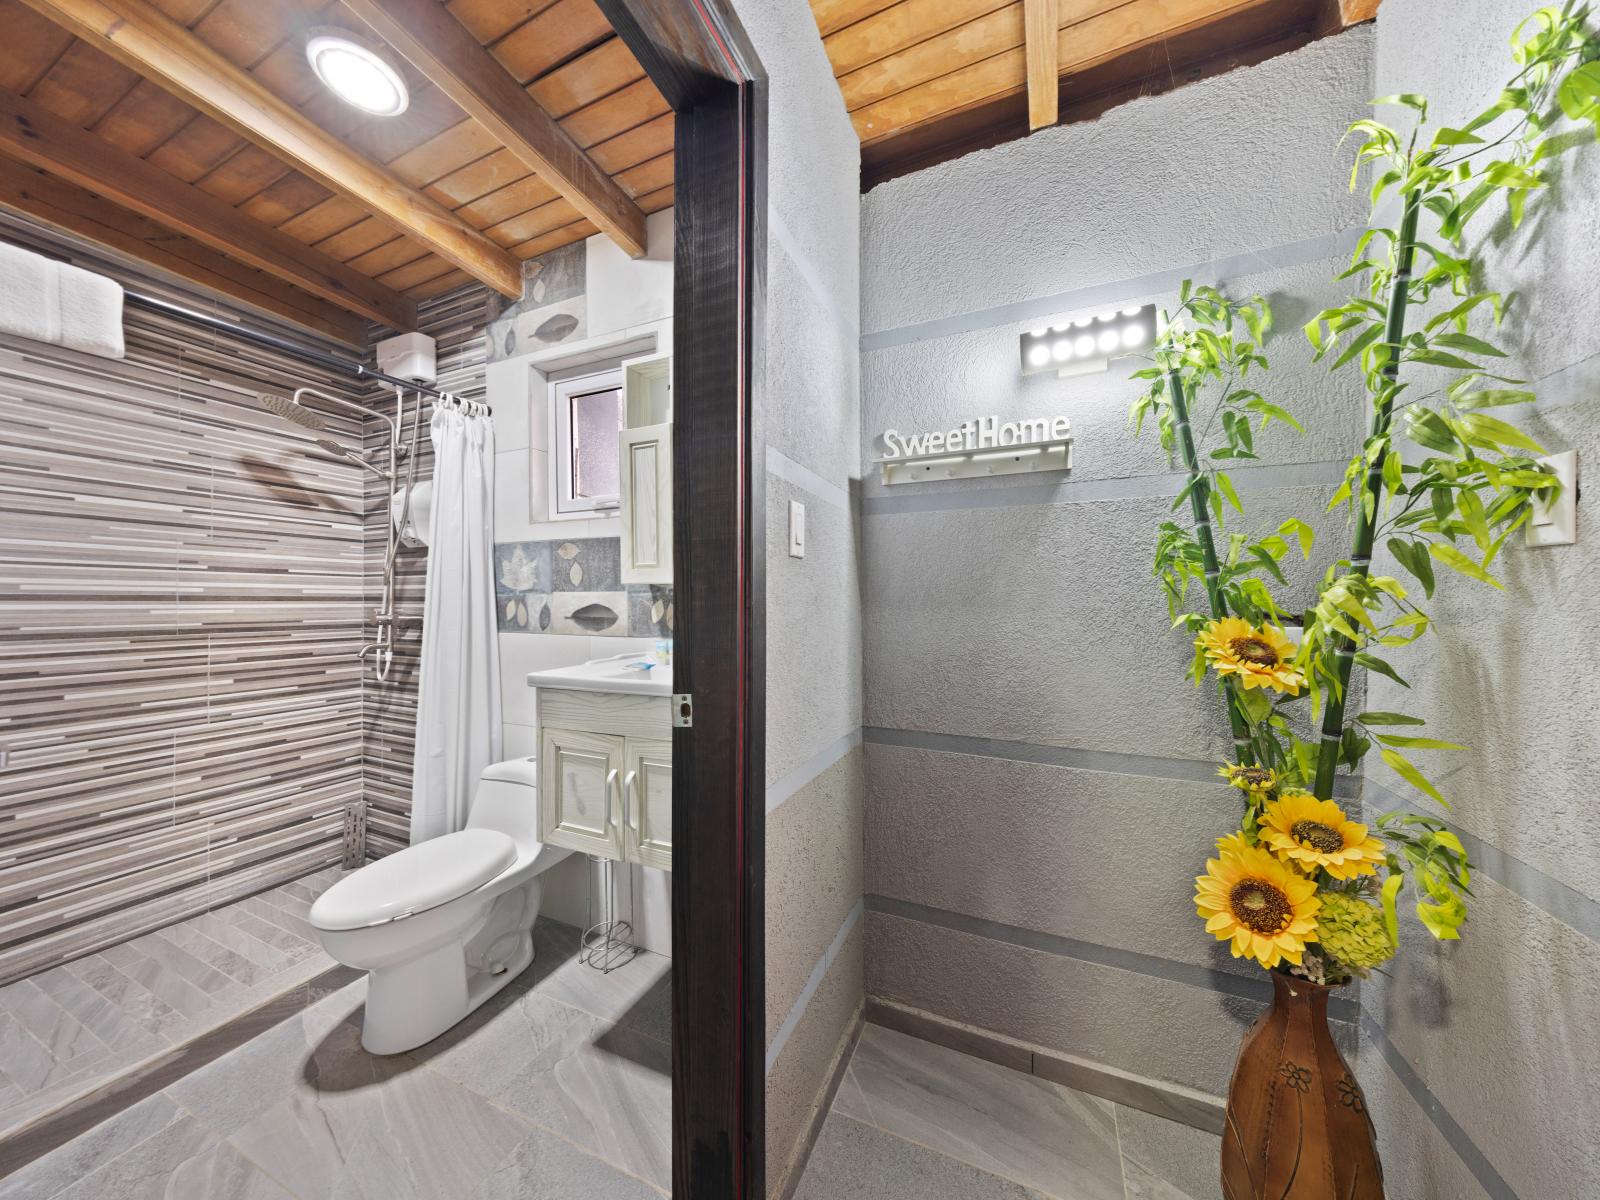 Experience luxury in this meticulously designed bathroom of the home in Aruba - Offering a spacious walk-in shower stall, a tranquil retreat for pampering and recharging - Entertain dreams in this elegant bathroom, a serene sanctuary after long day